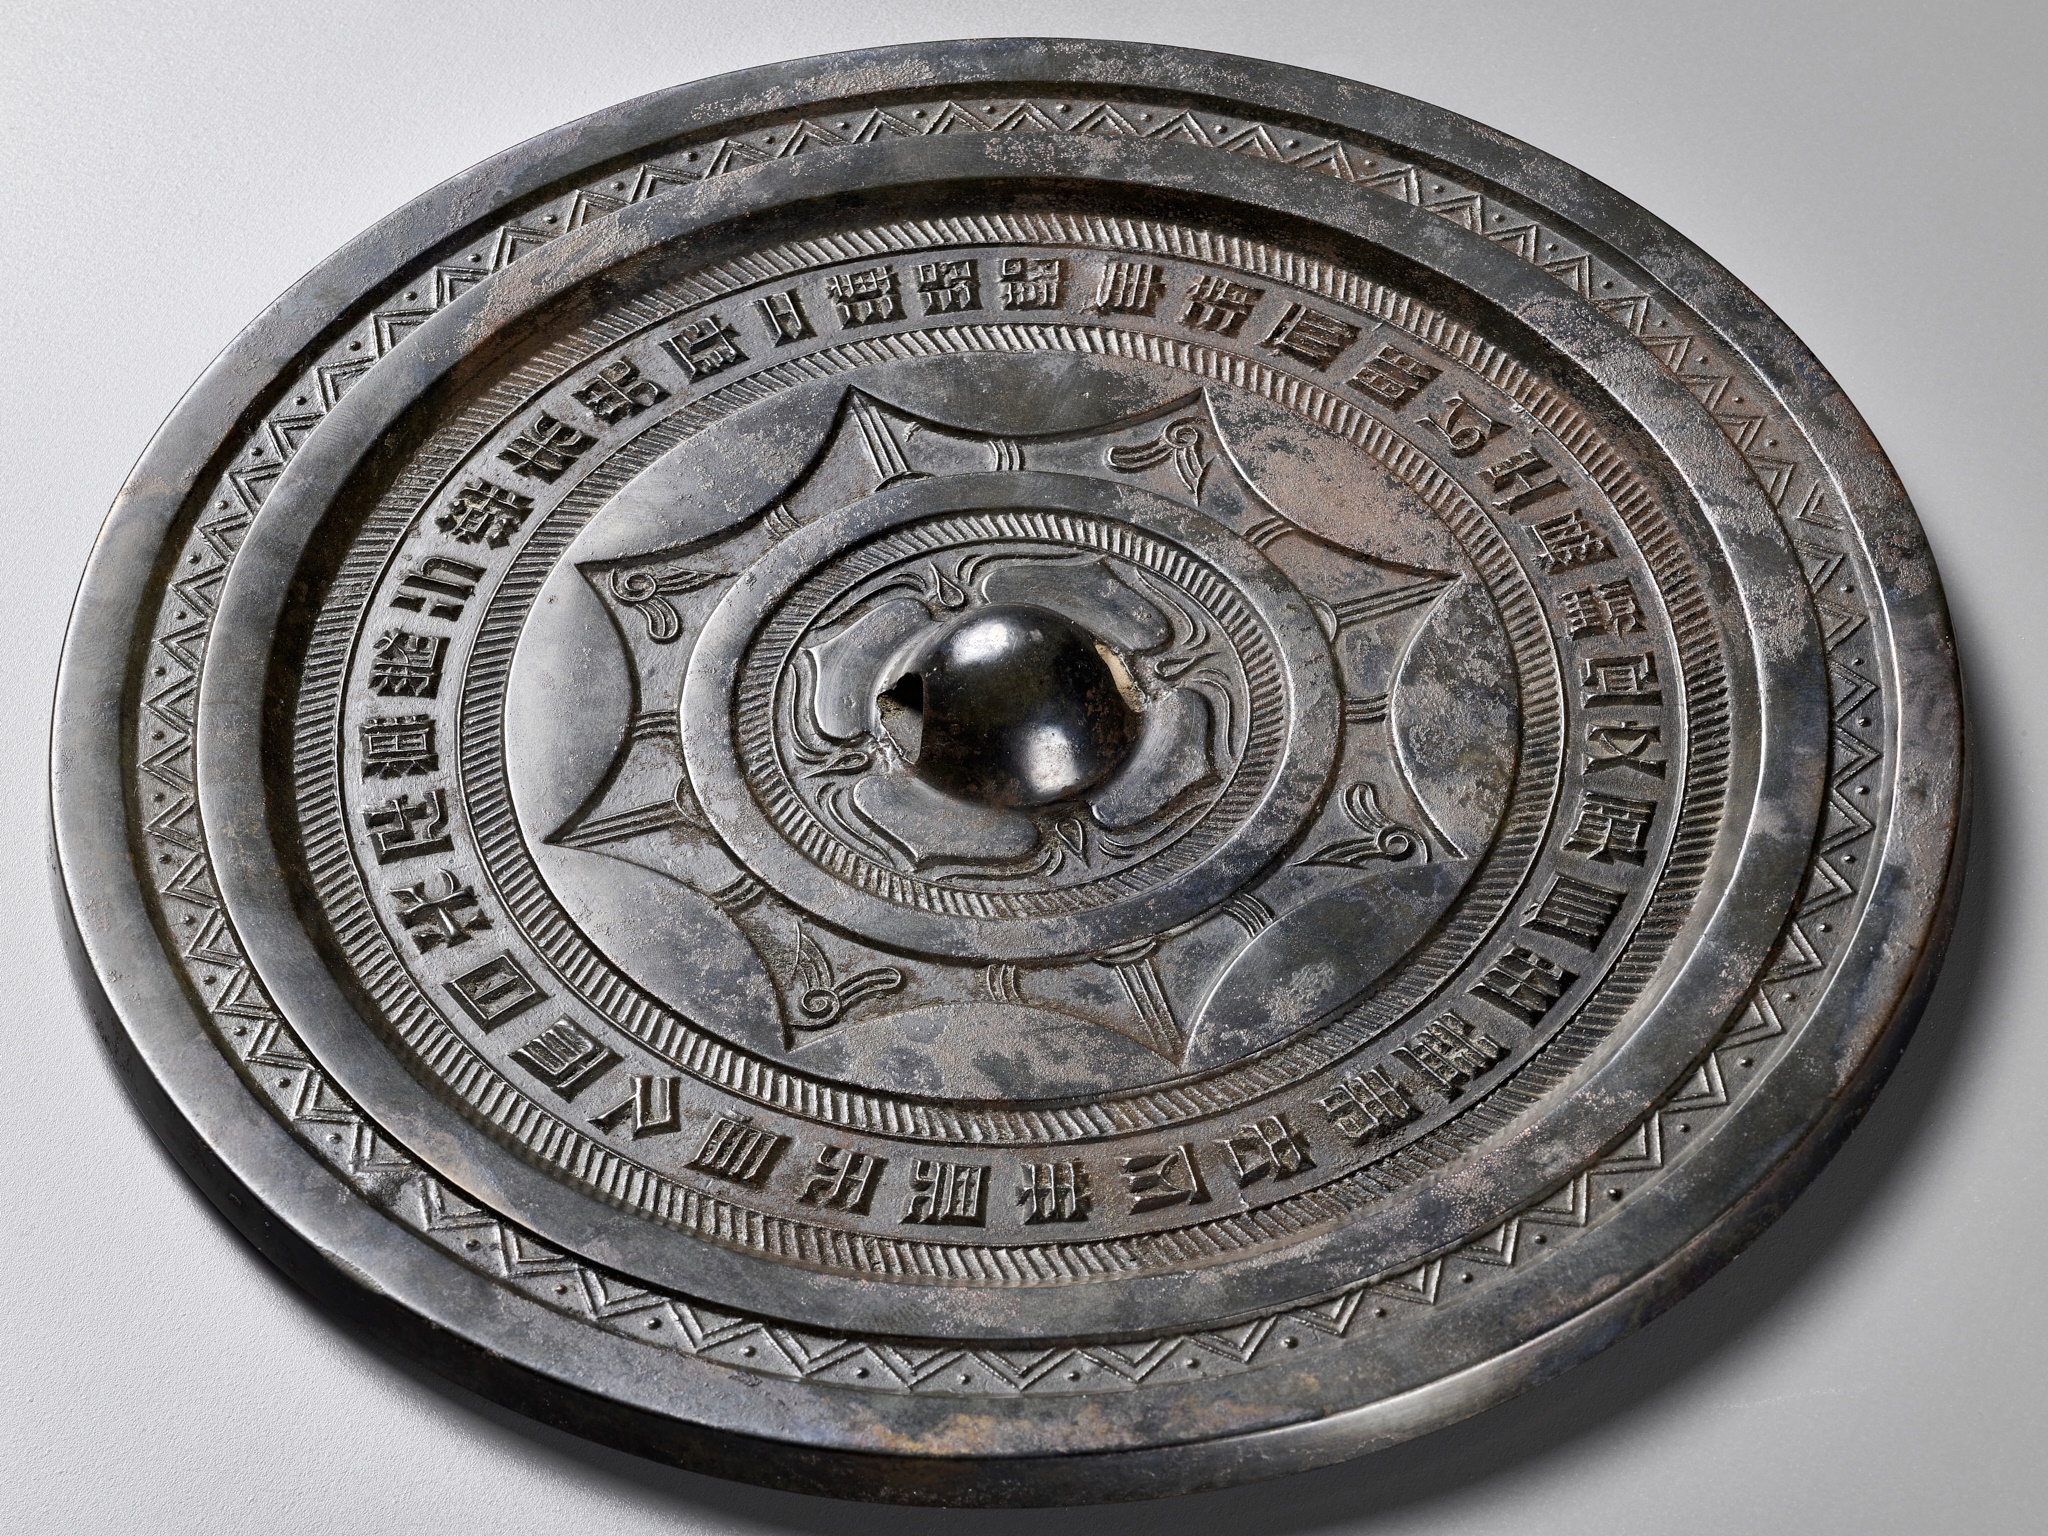 A LARGE BRONZE MIRROR WITH A 37-CHARACTER INSCRIPTION, HAN DYNASTY, CHINA, 206 BC-220 AD - Image 15 of 16